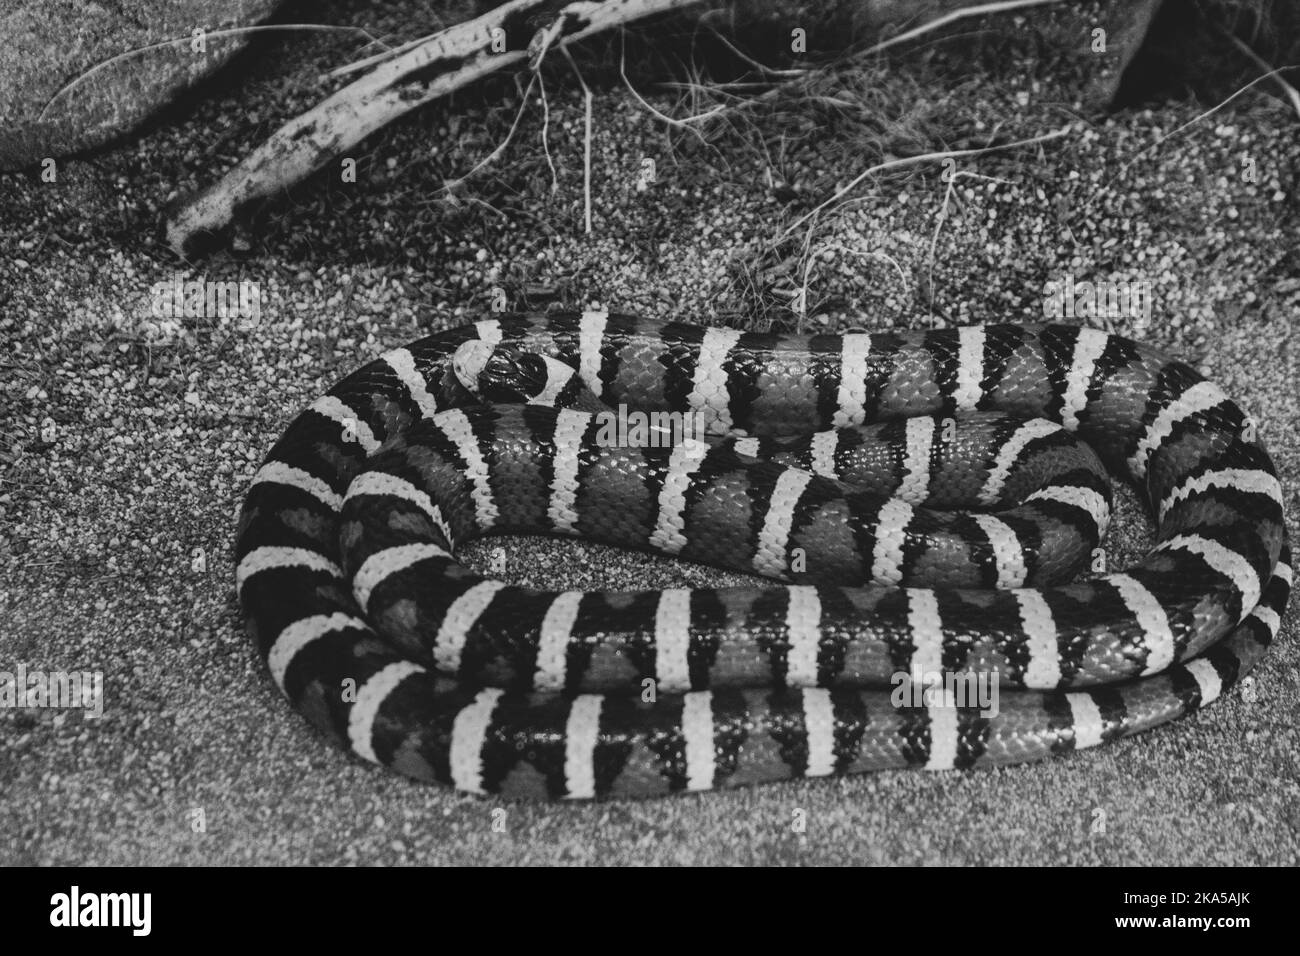 A Sonoran mountain King-snake curled up around itself in an enclosure. Image is in black and white to highlight to color bands. Stock Photo